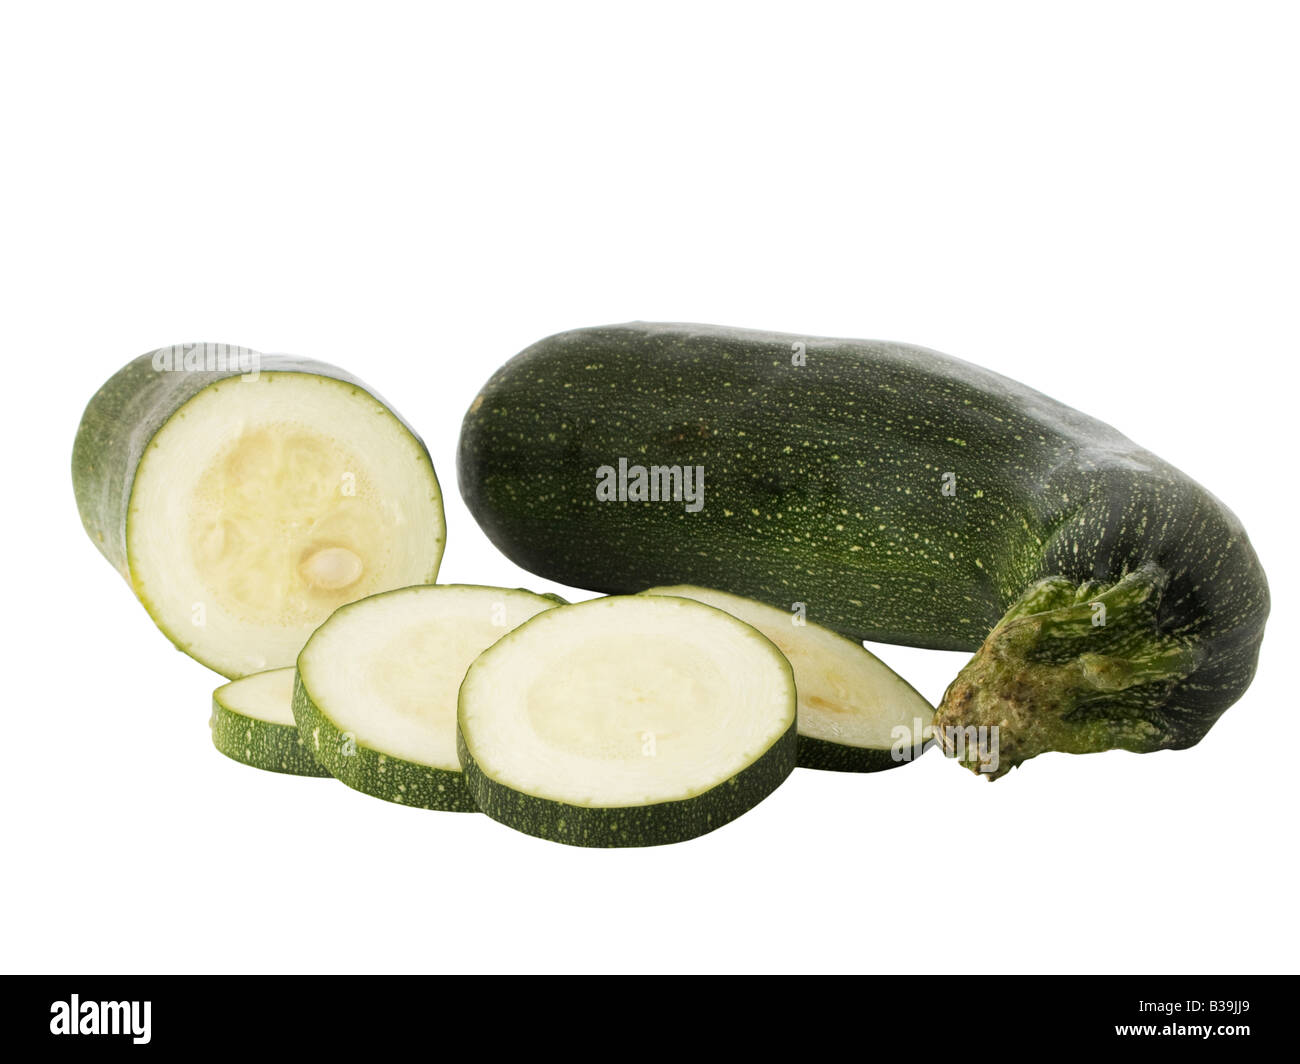 Sliced zucchini or courgette isolated on a white background Stock Photo